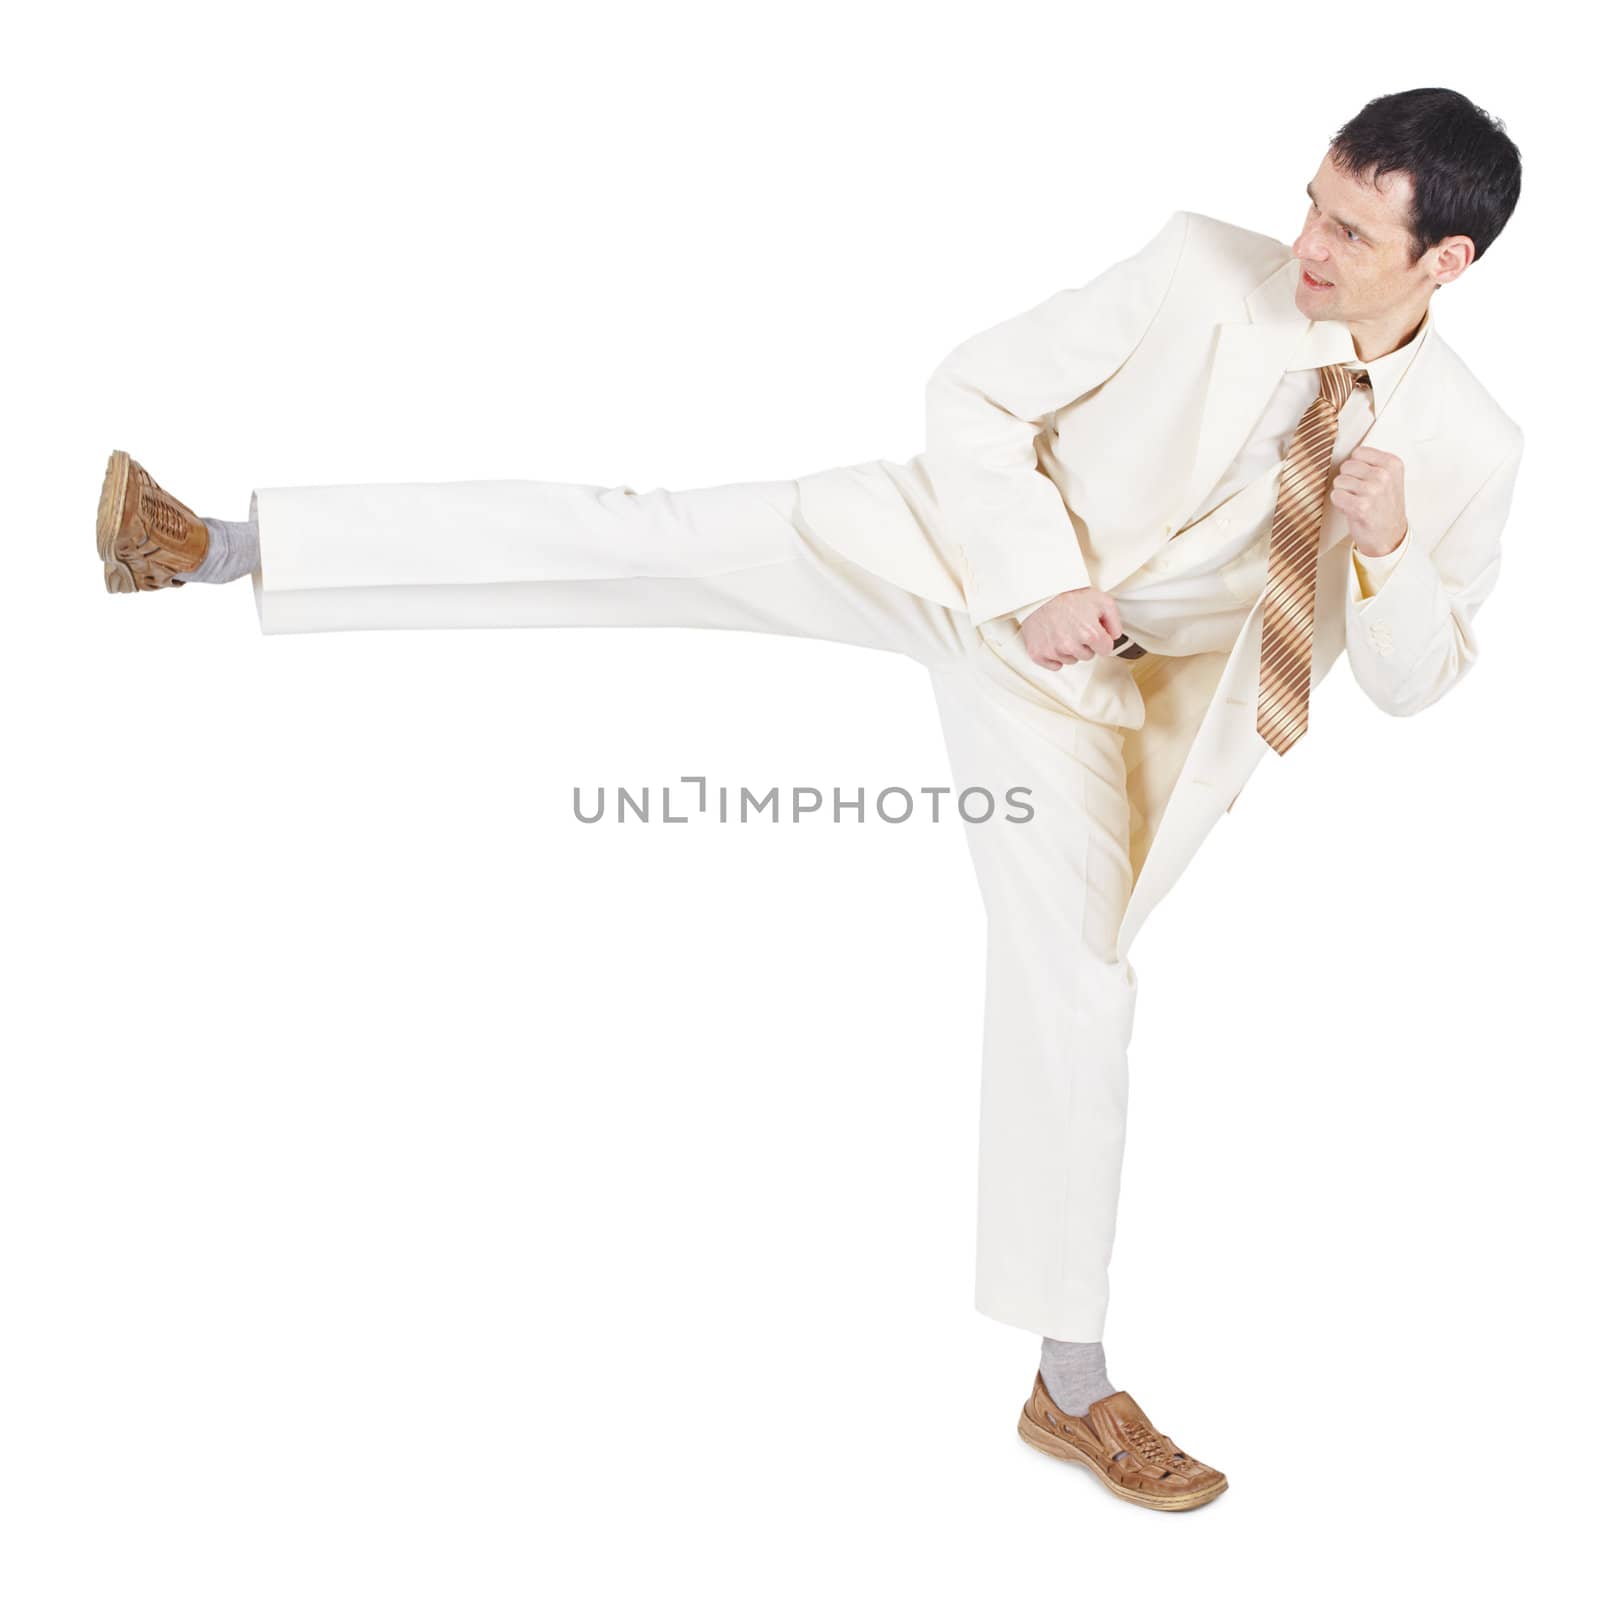 The man in a light suit beats a foot, is isolated on a white background